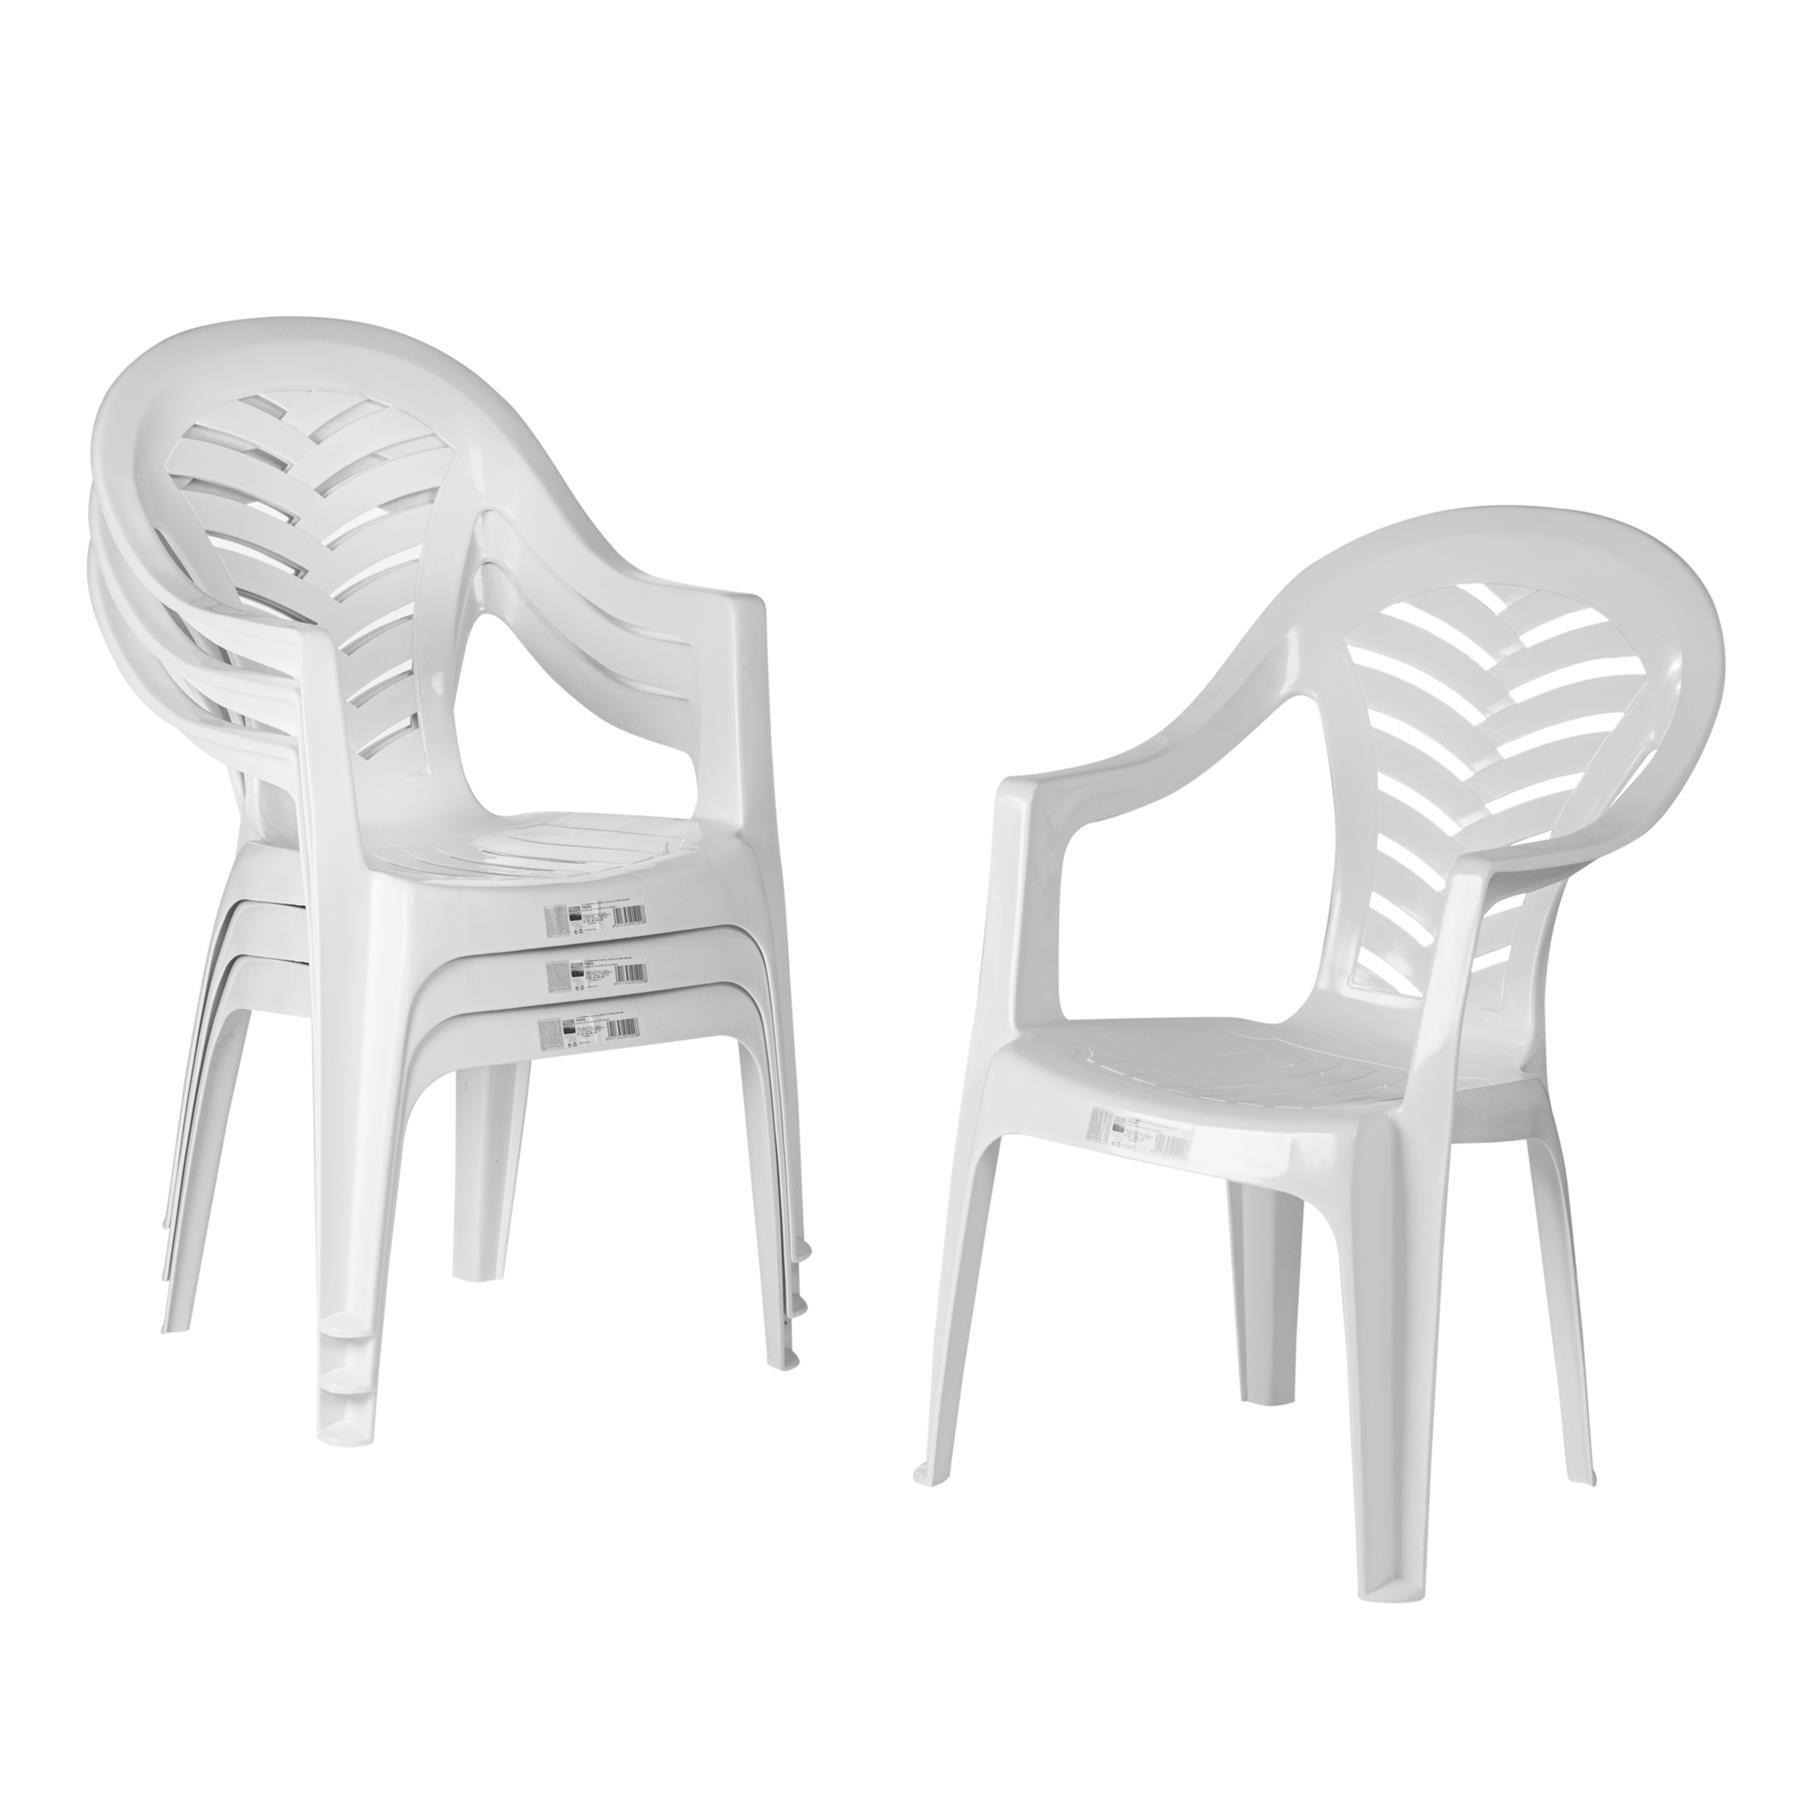 Palma Garden Dining Chairs Pack of 6 - image 1